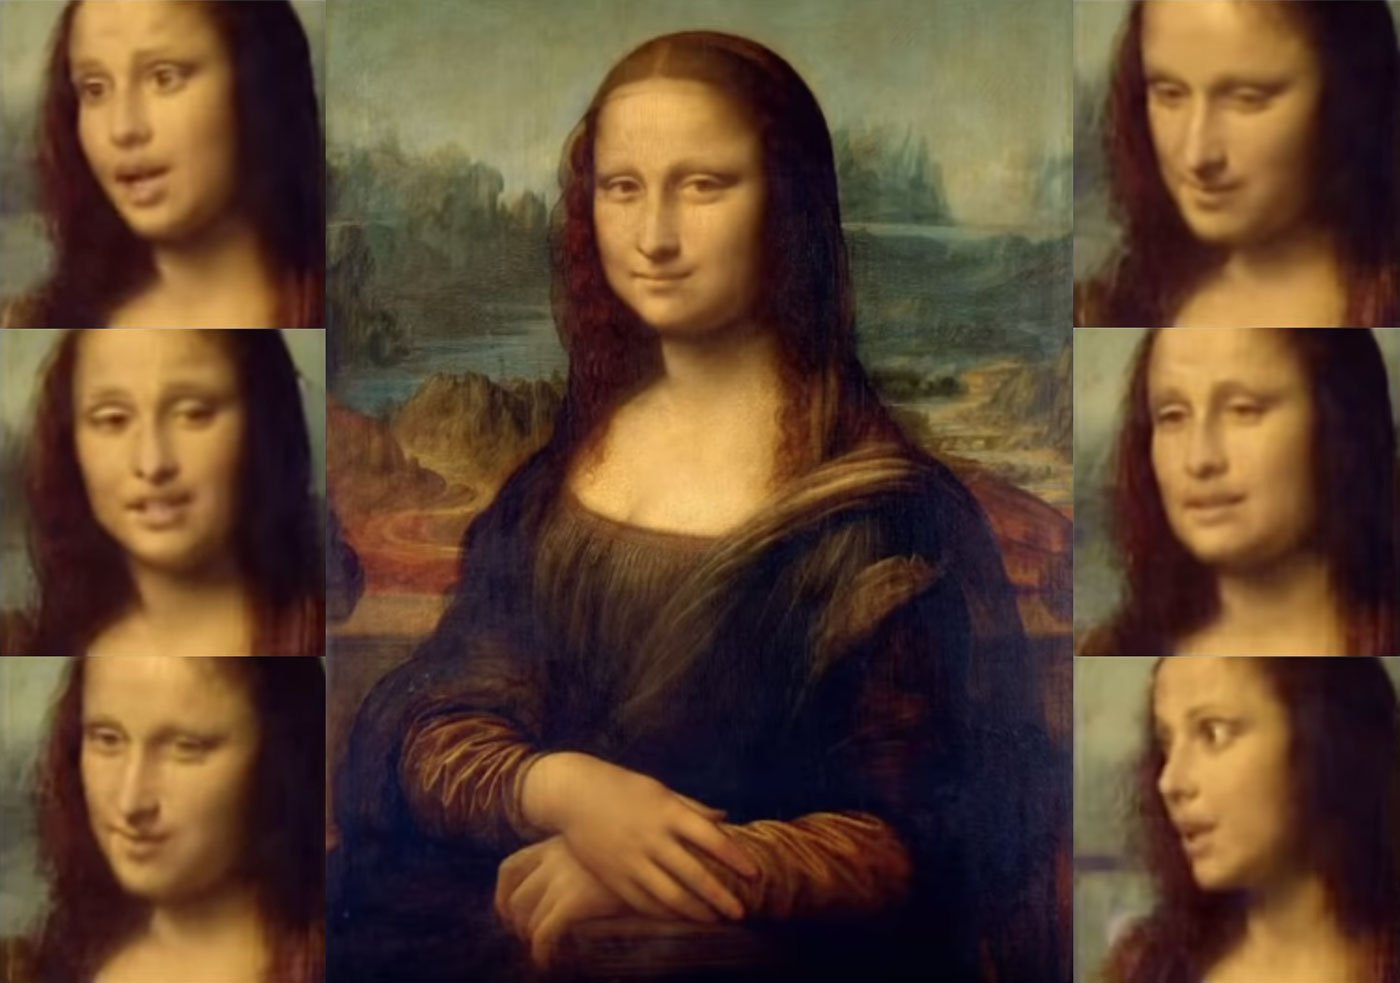 Monalesa Xxx Video In - Russian Researchers Used AI to Bring the Mona Lisa to Life and It Freaked  Everyone Out. See the Video Here